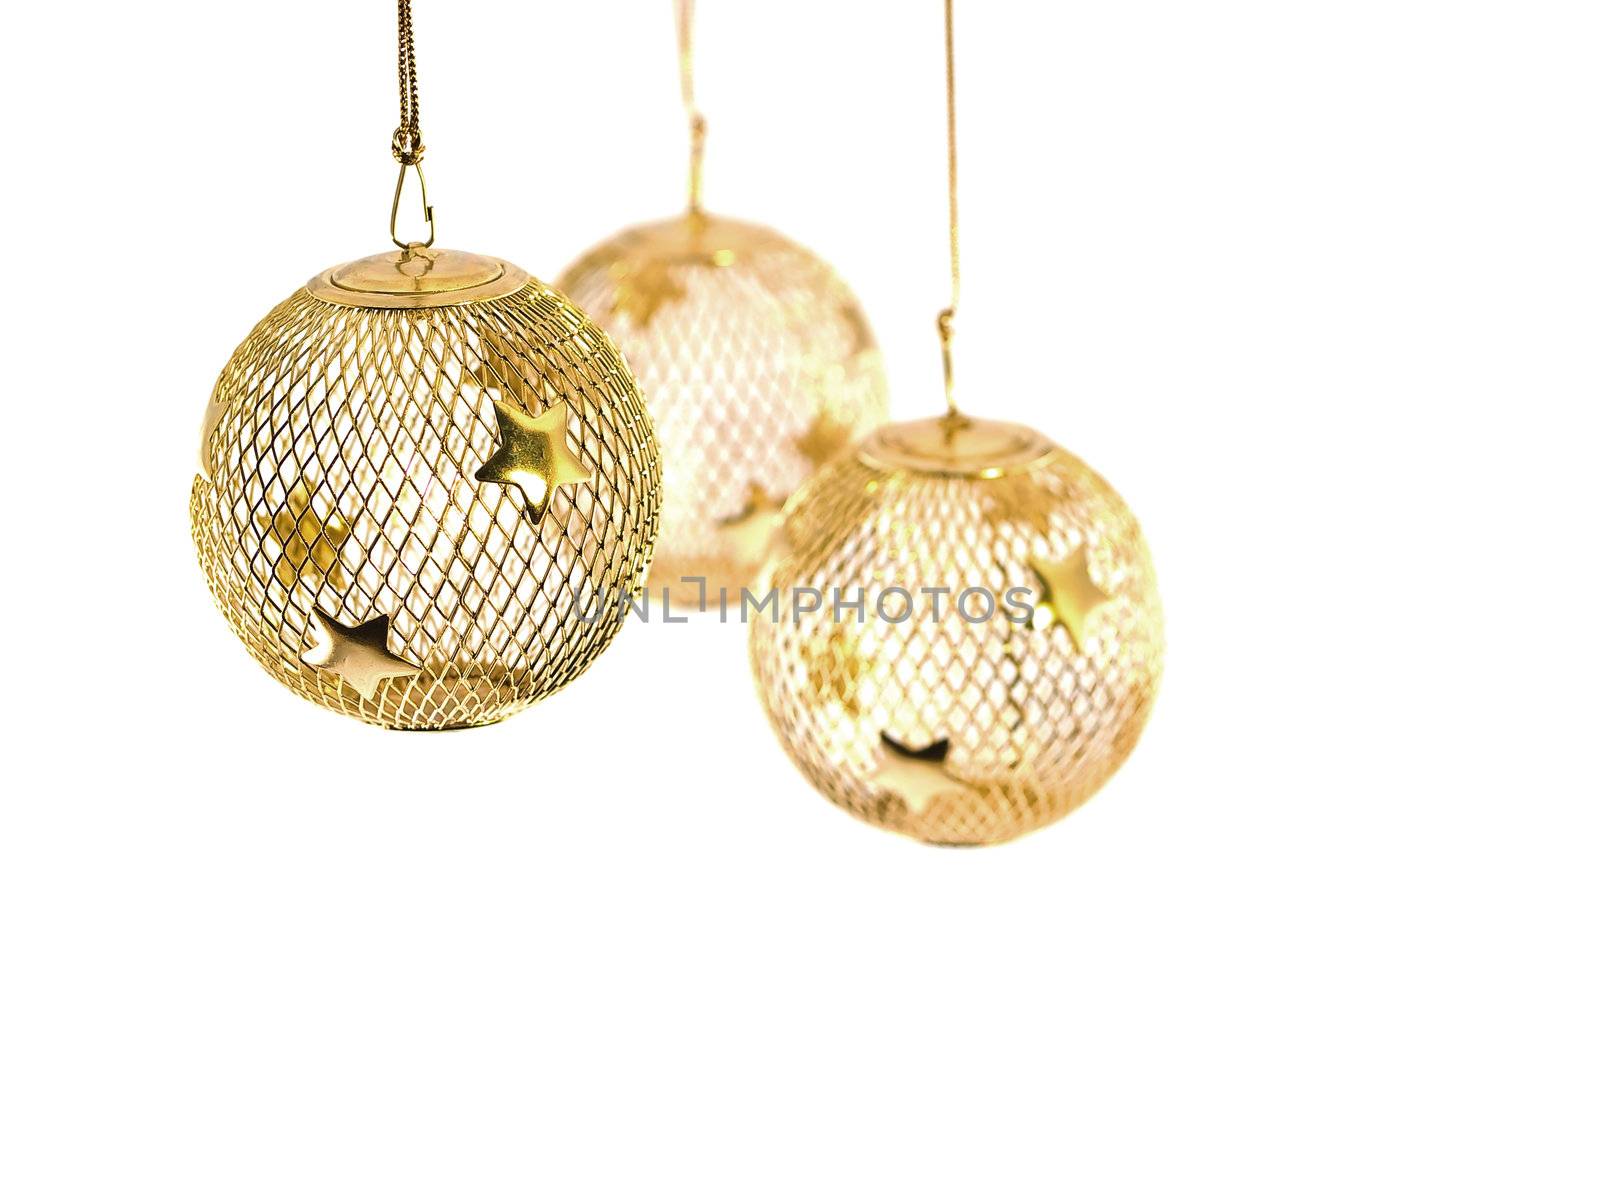 A hollow gold wire mesh Christmas ornament with stars